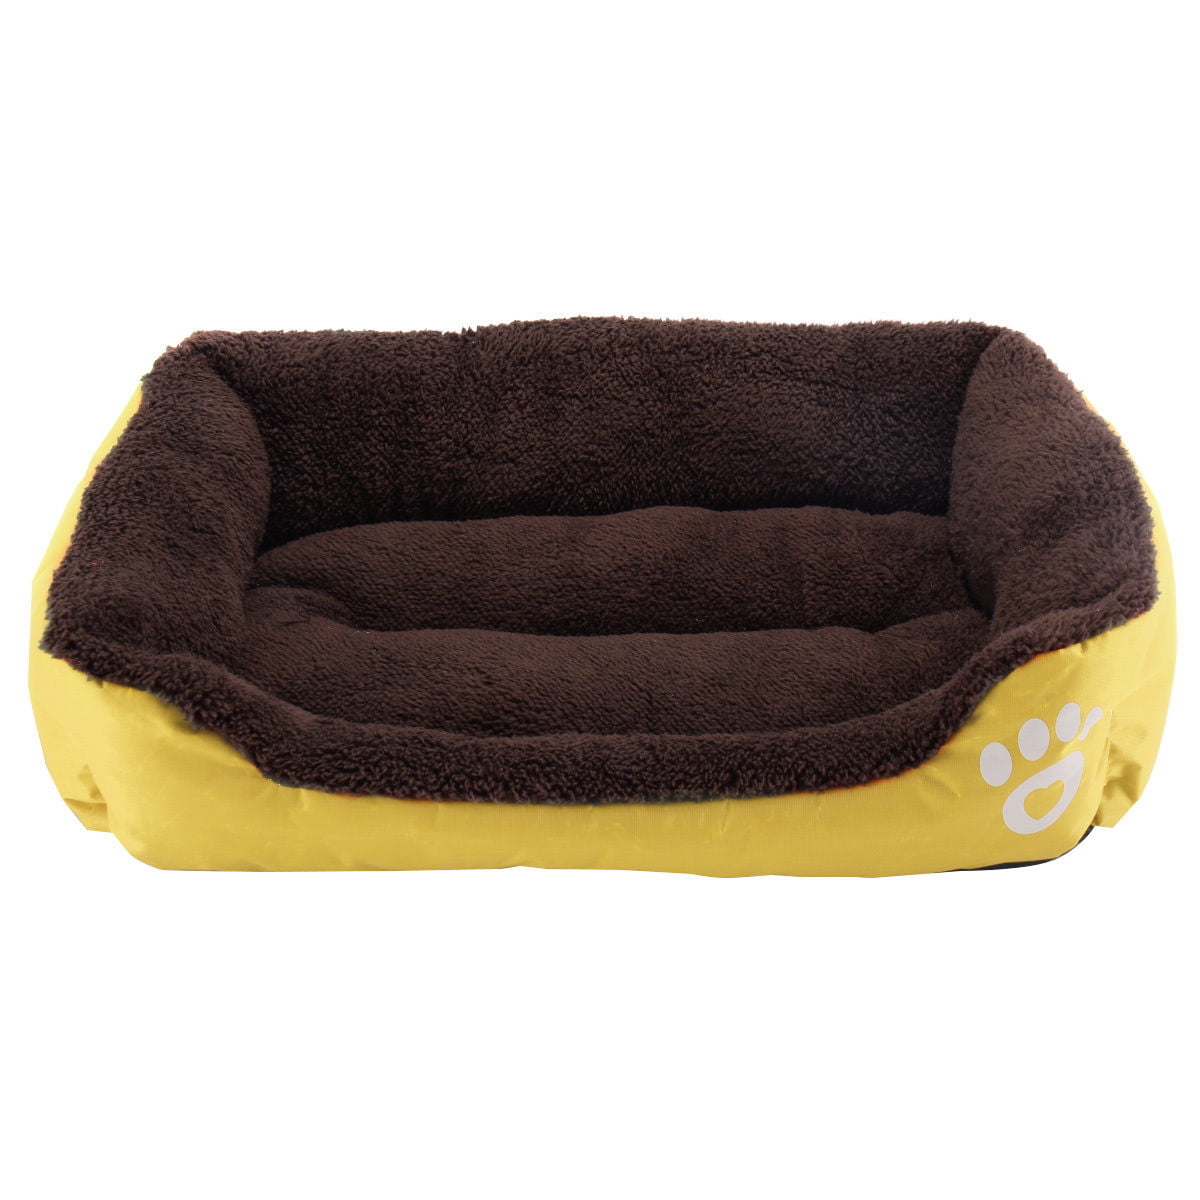 Pet Dog Cat Bed Puppy Cushion House Soft Warm Kennel Mat Blanket 3 SIZE New 